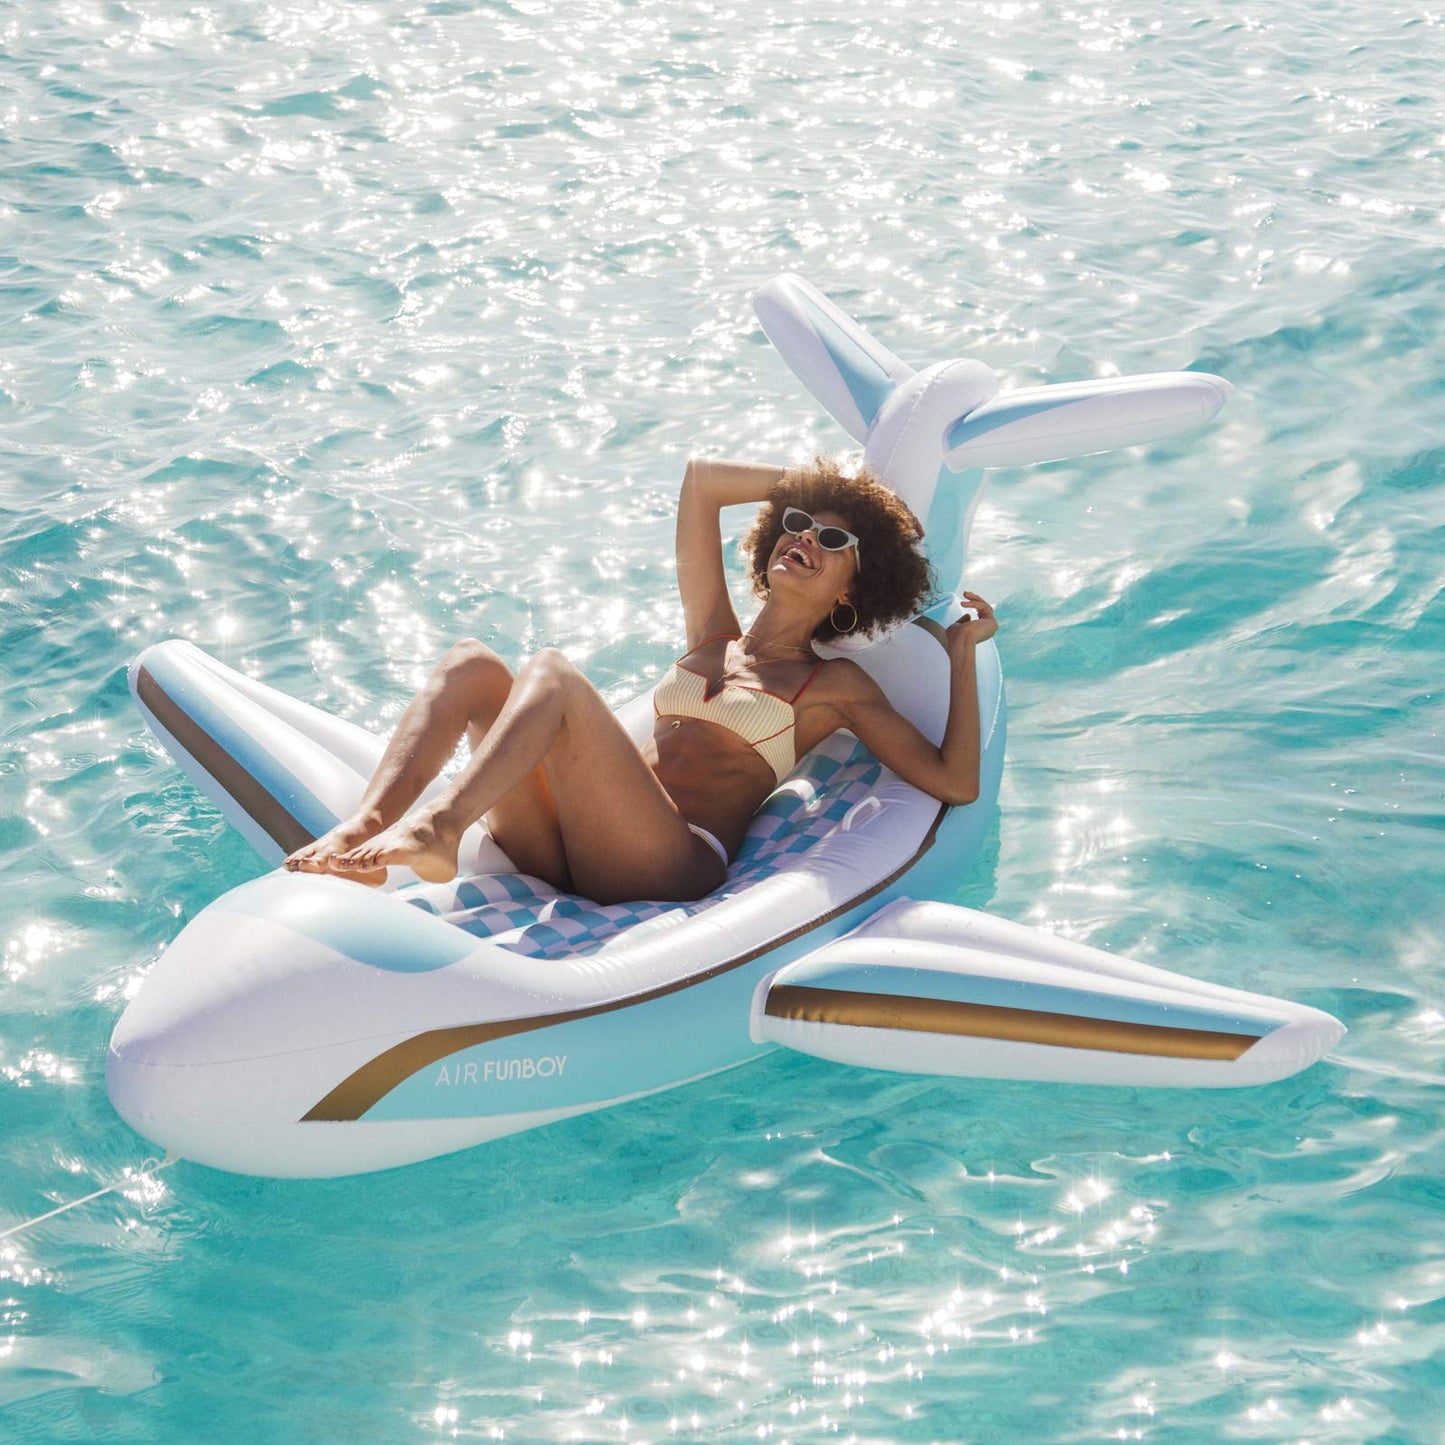 FUNBOY Giant Inflatable Luxury Private Jet Airplane Pool Float, Luxury Float for Summer Pool Parties and Entertainment White